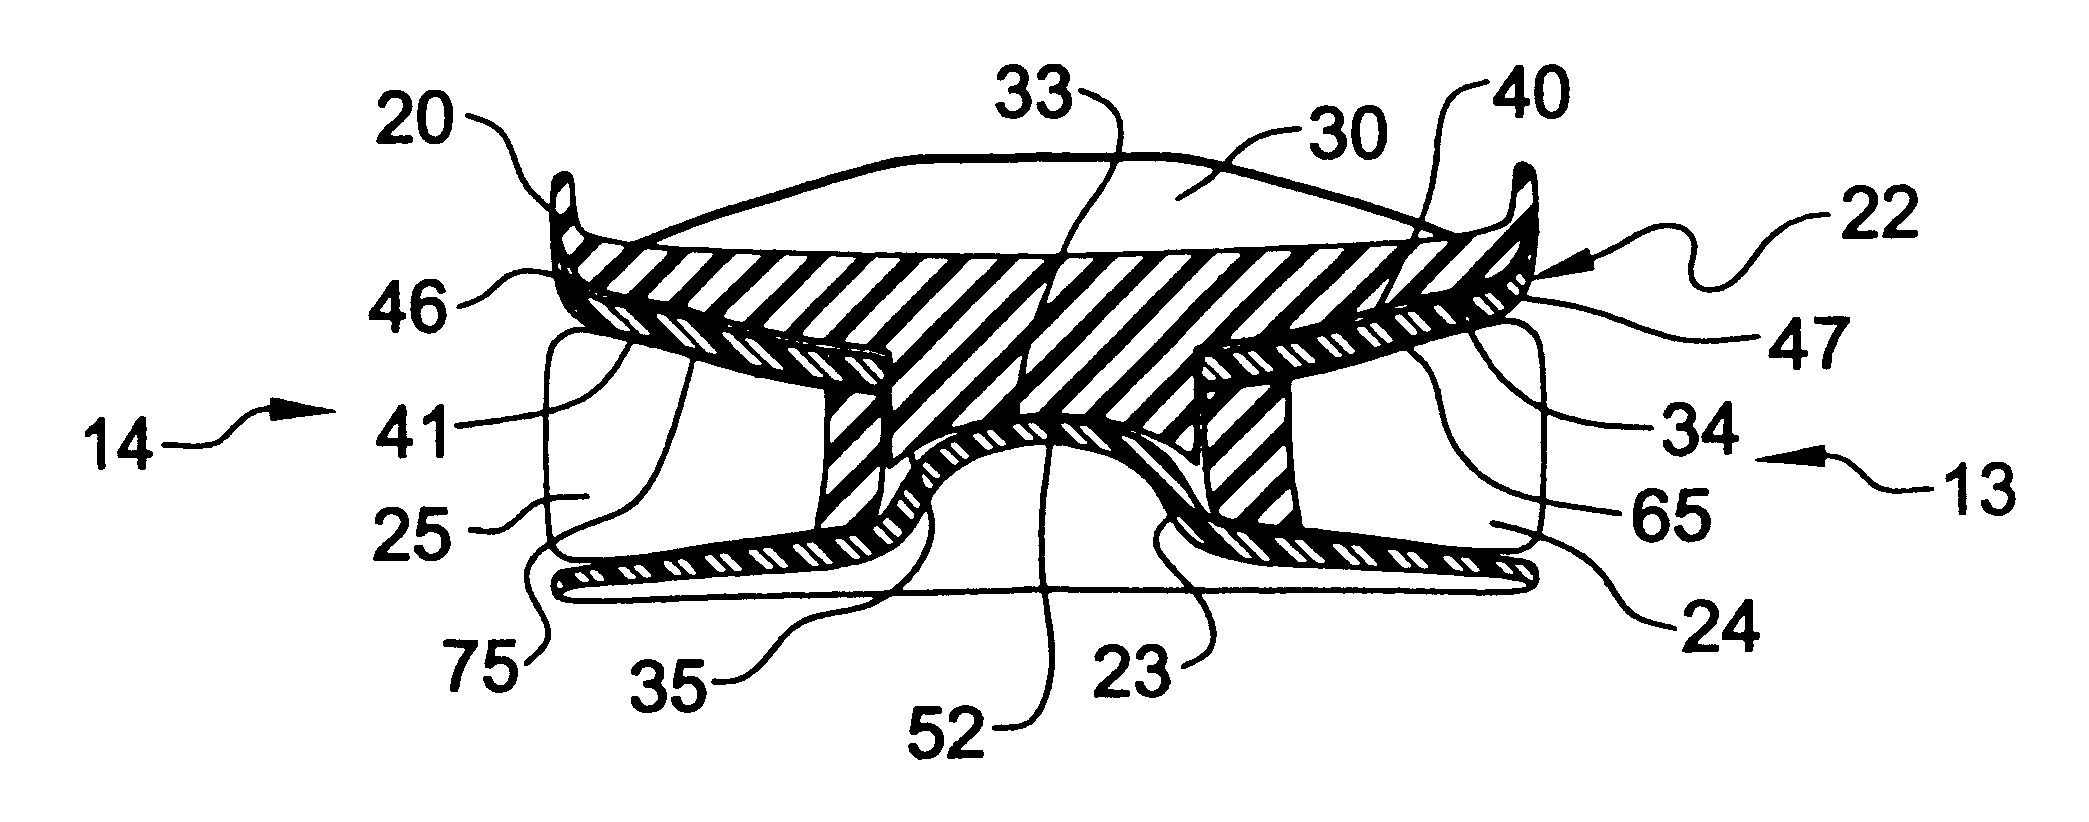 Shoe incorporating improved shock absorption and stabilizing elements